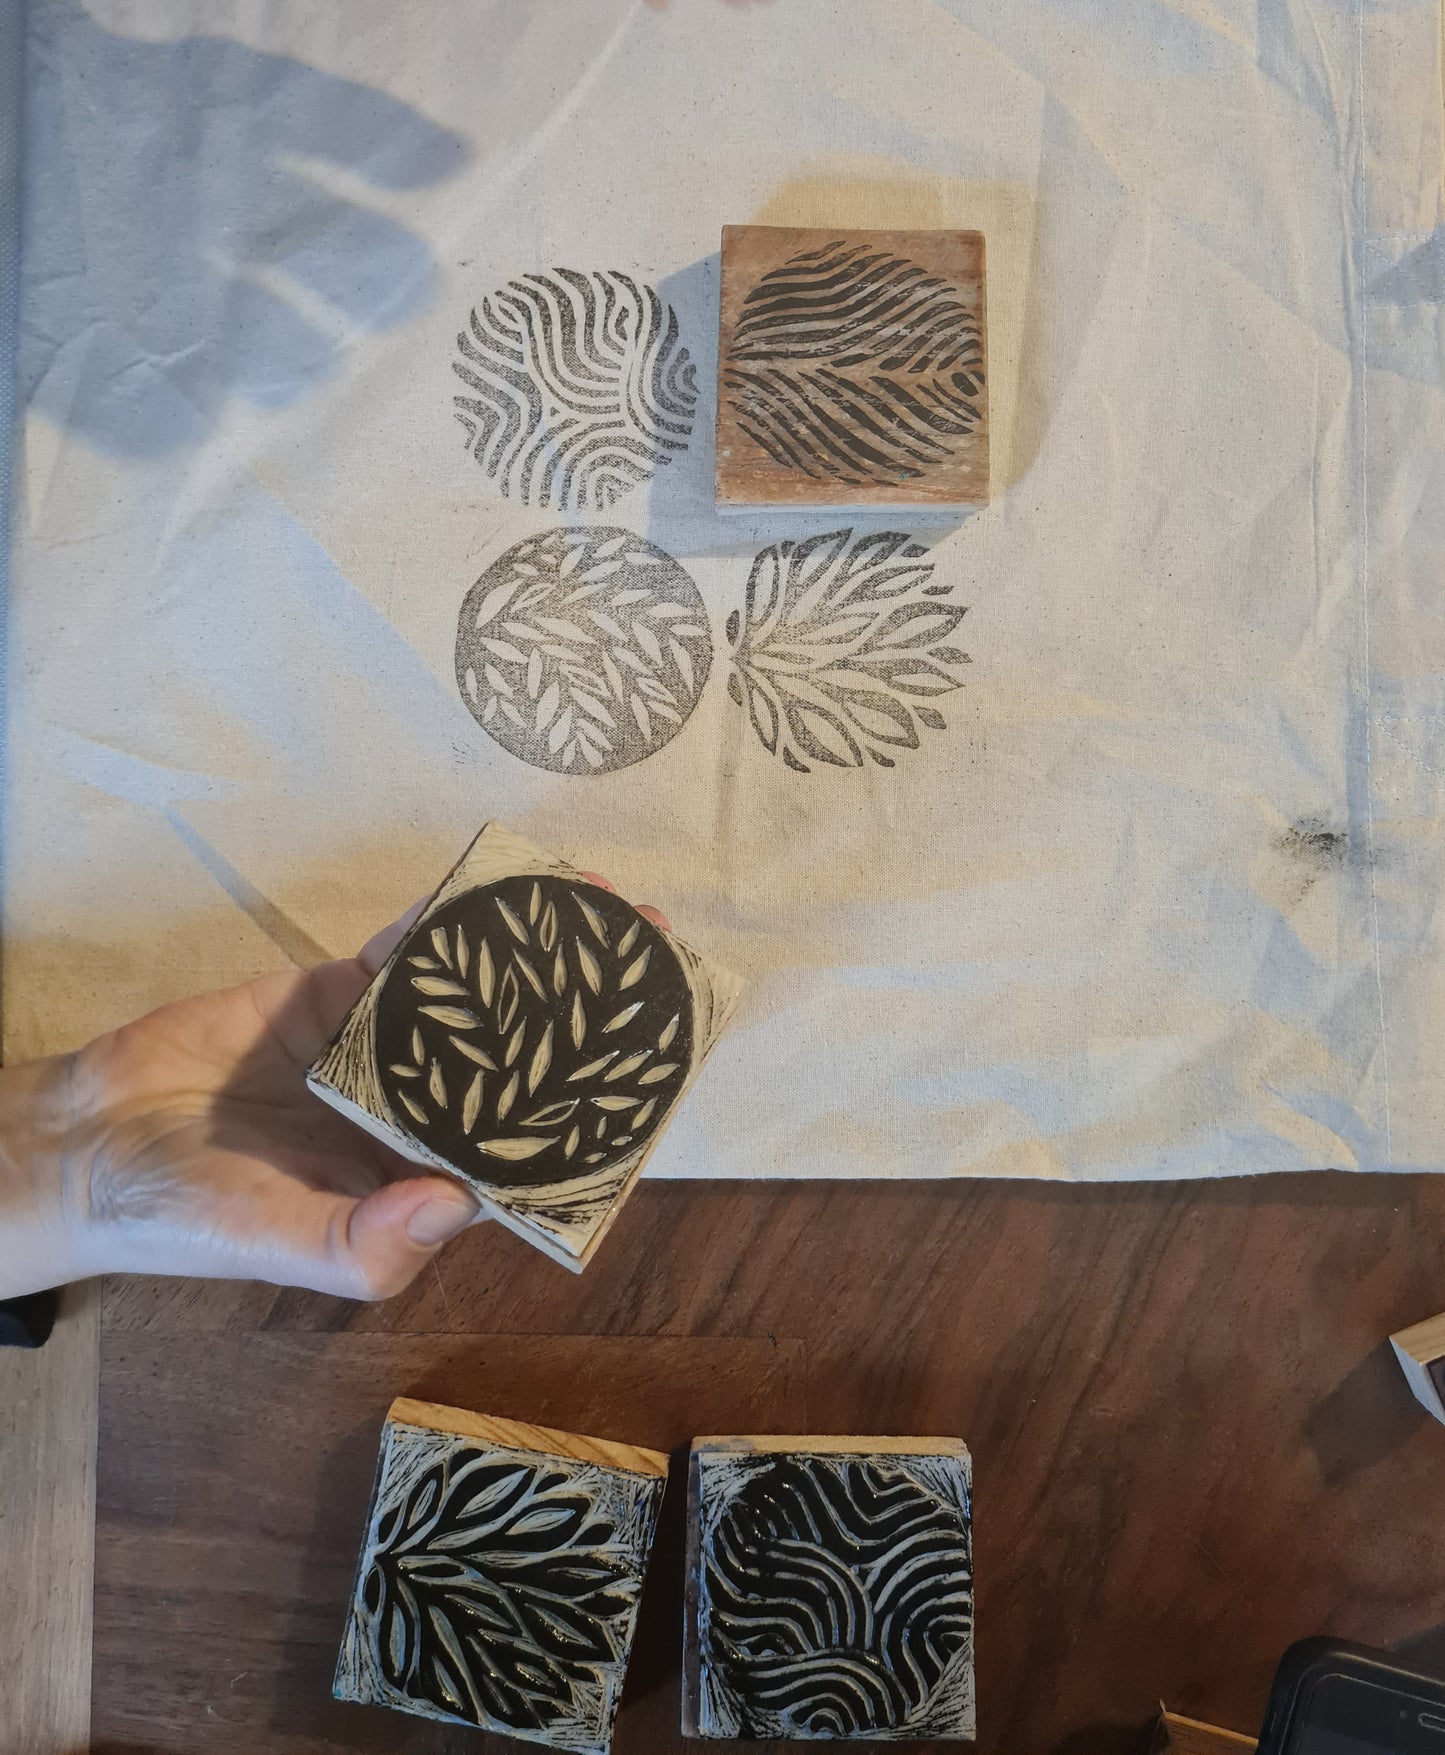 Textile Printing Workshop "Print your own Tote Bag" with Ana and Isabel in Porto, Portugal by subcultours